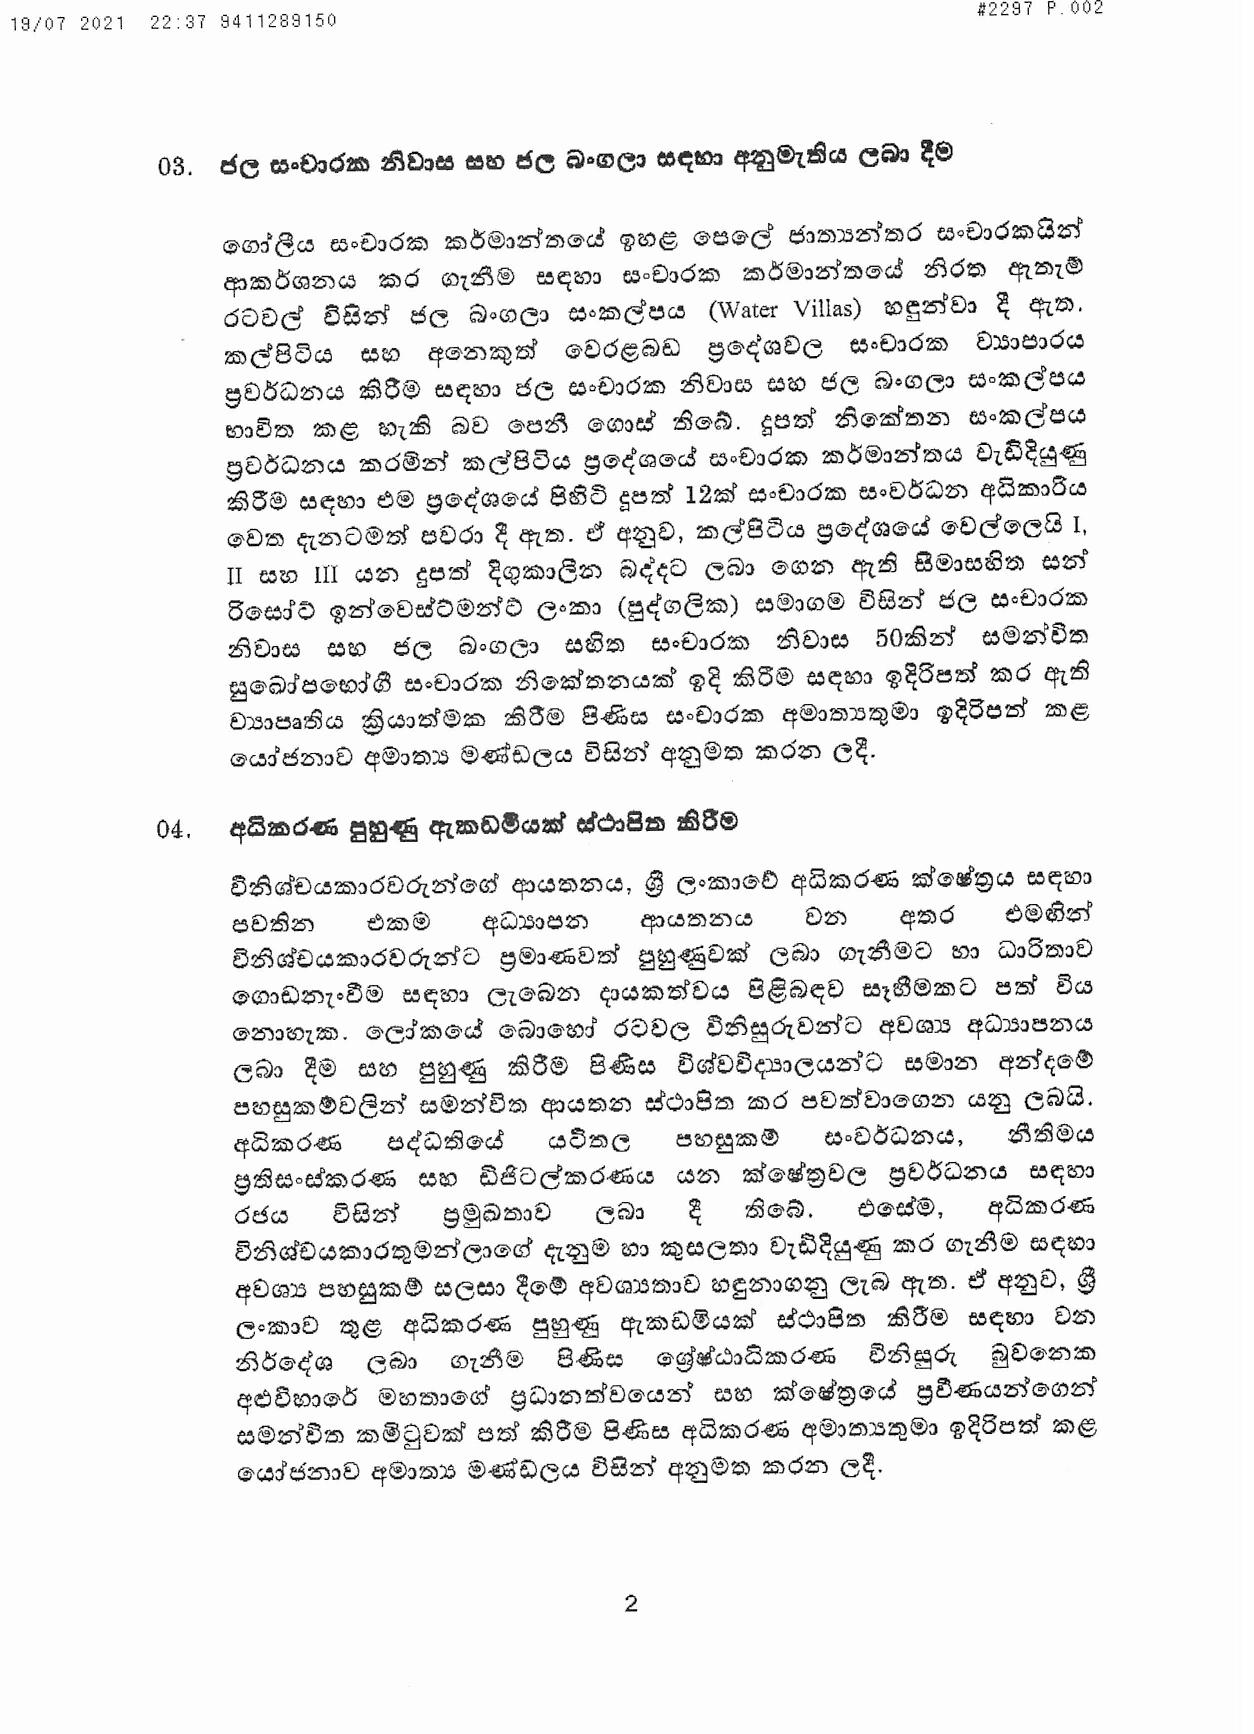 Cabinet Decision on 19.07.2021 page 002